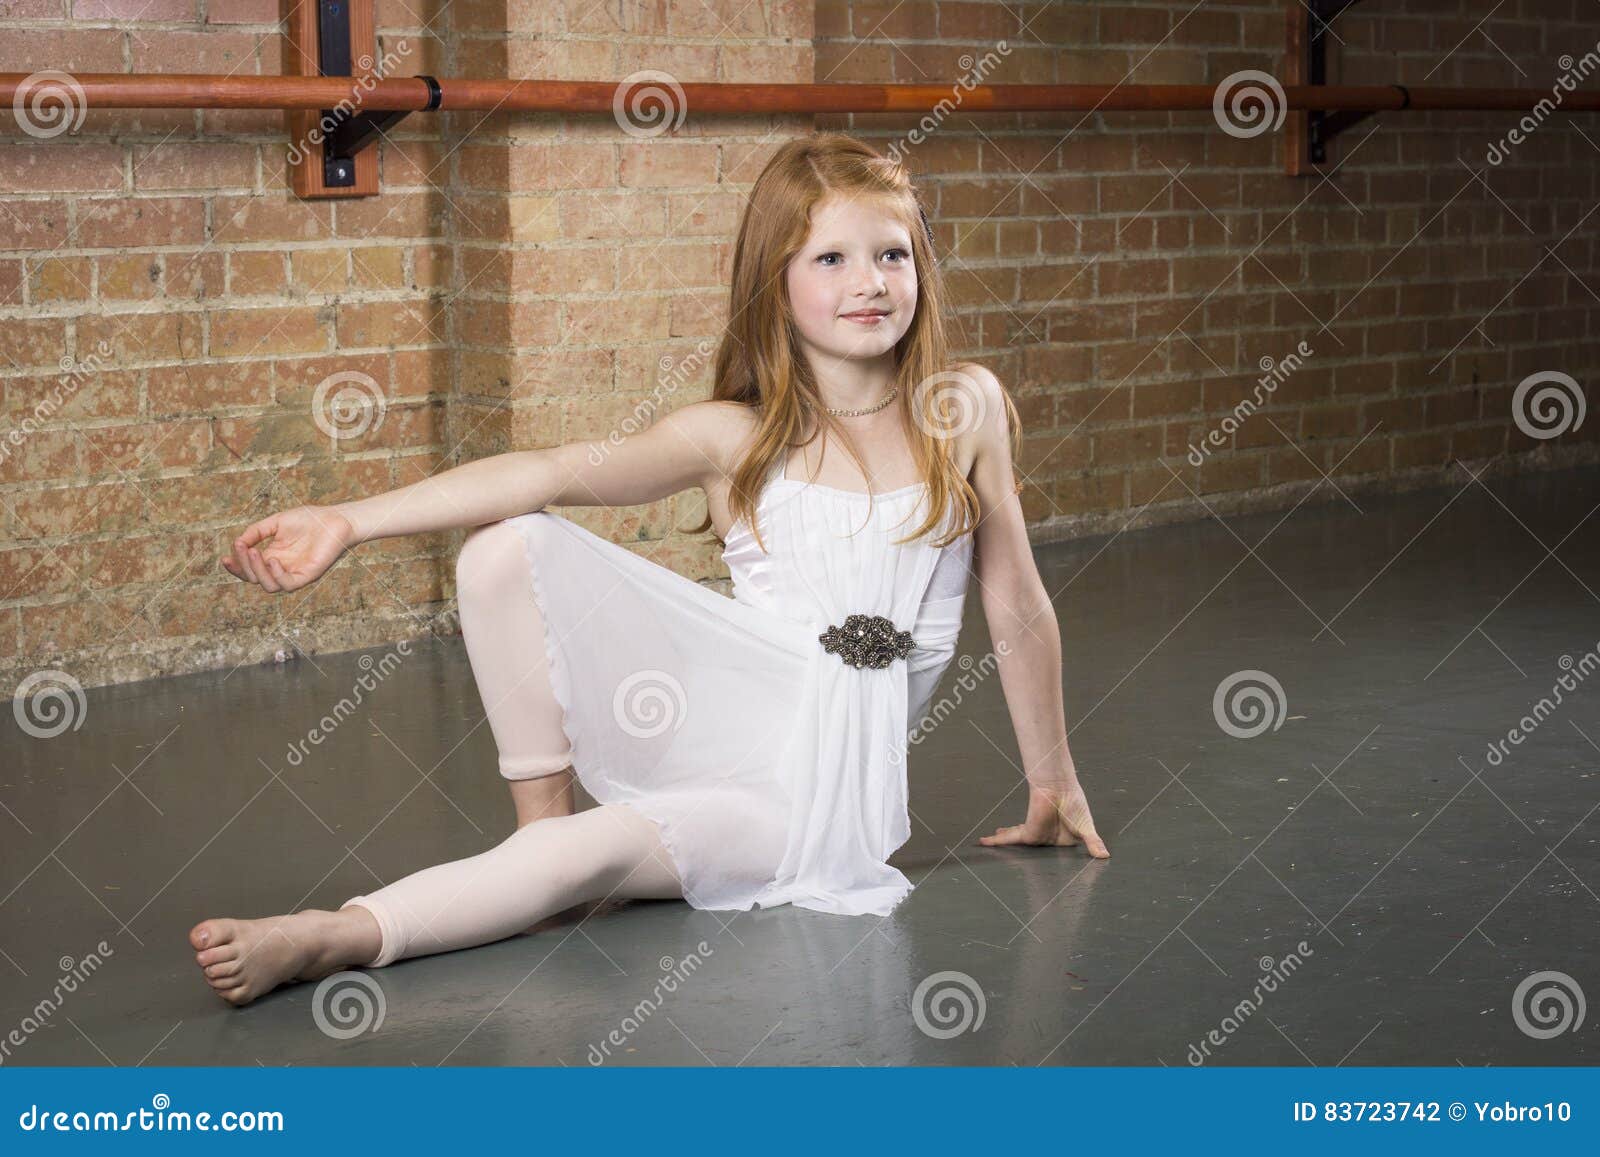 beautiful young and talented dancer posing at a dance studio